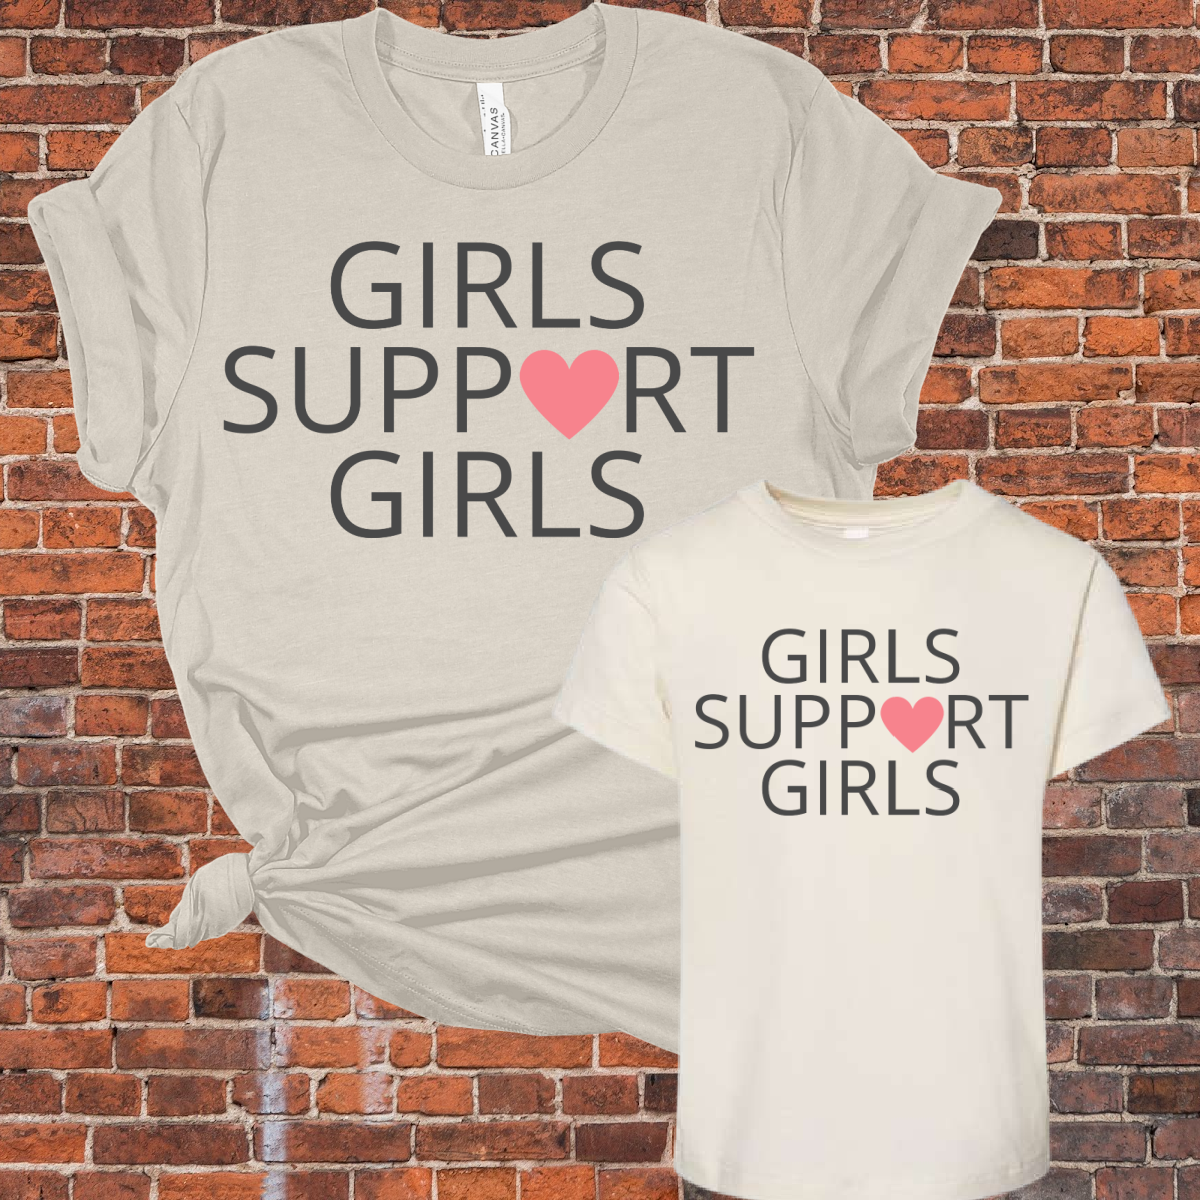 Girls Support Girls (Youth & Adult) - Ready To Ship